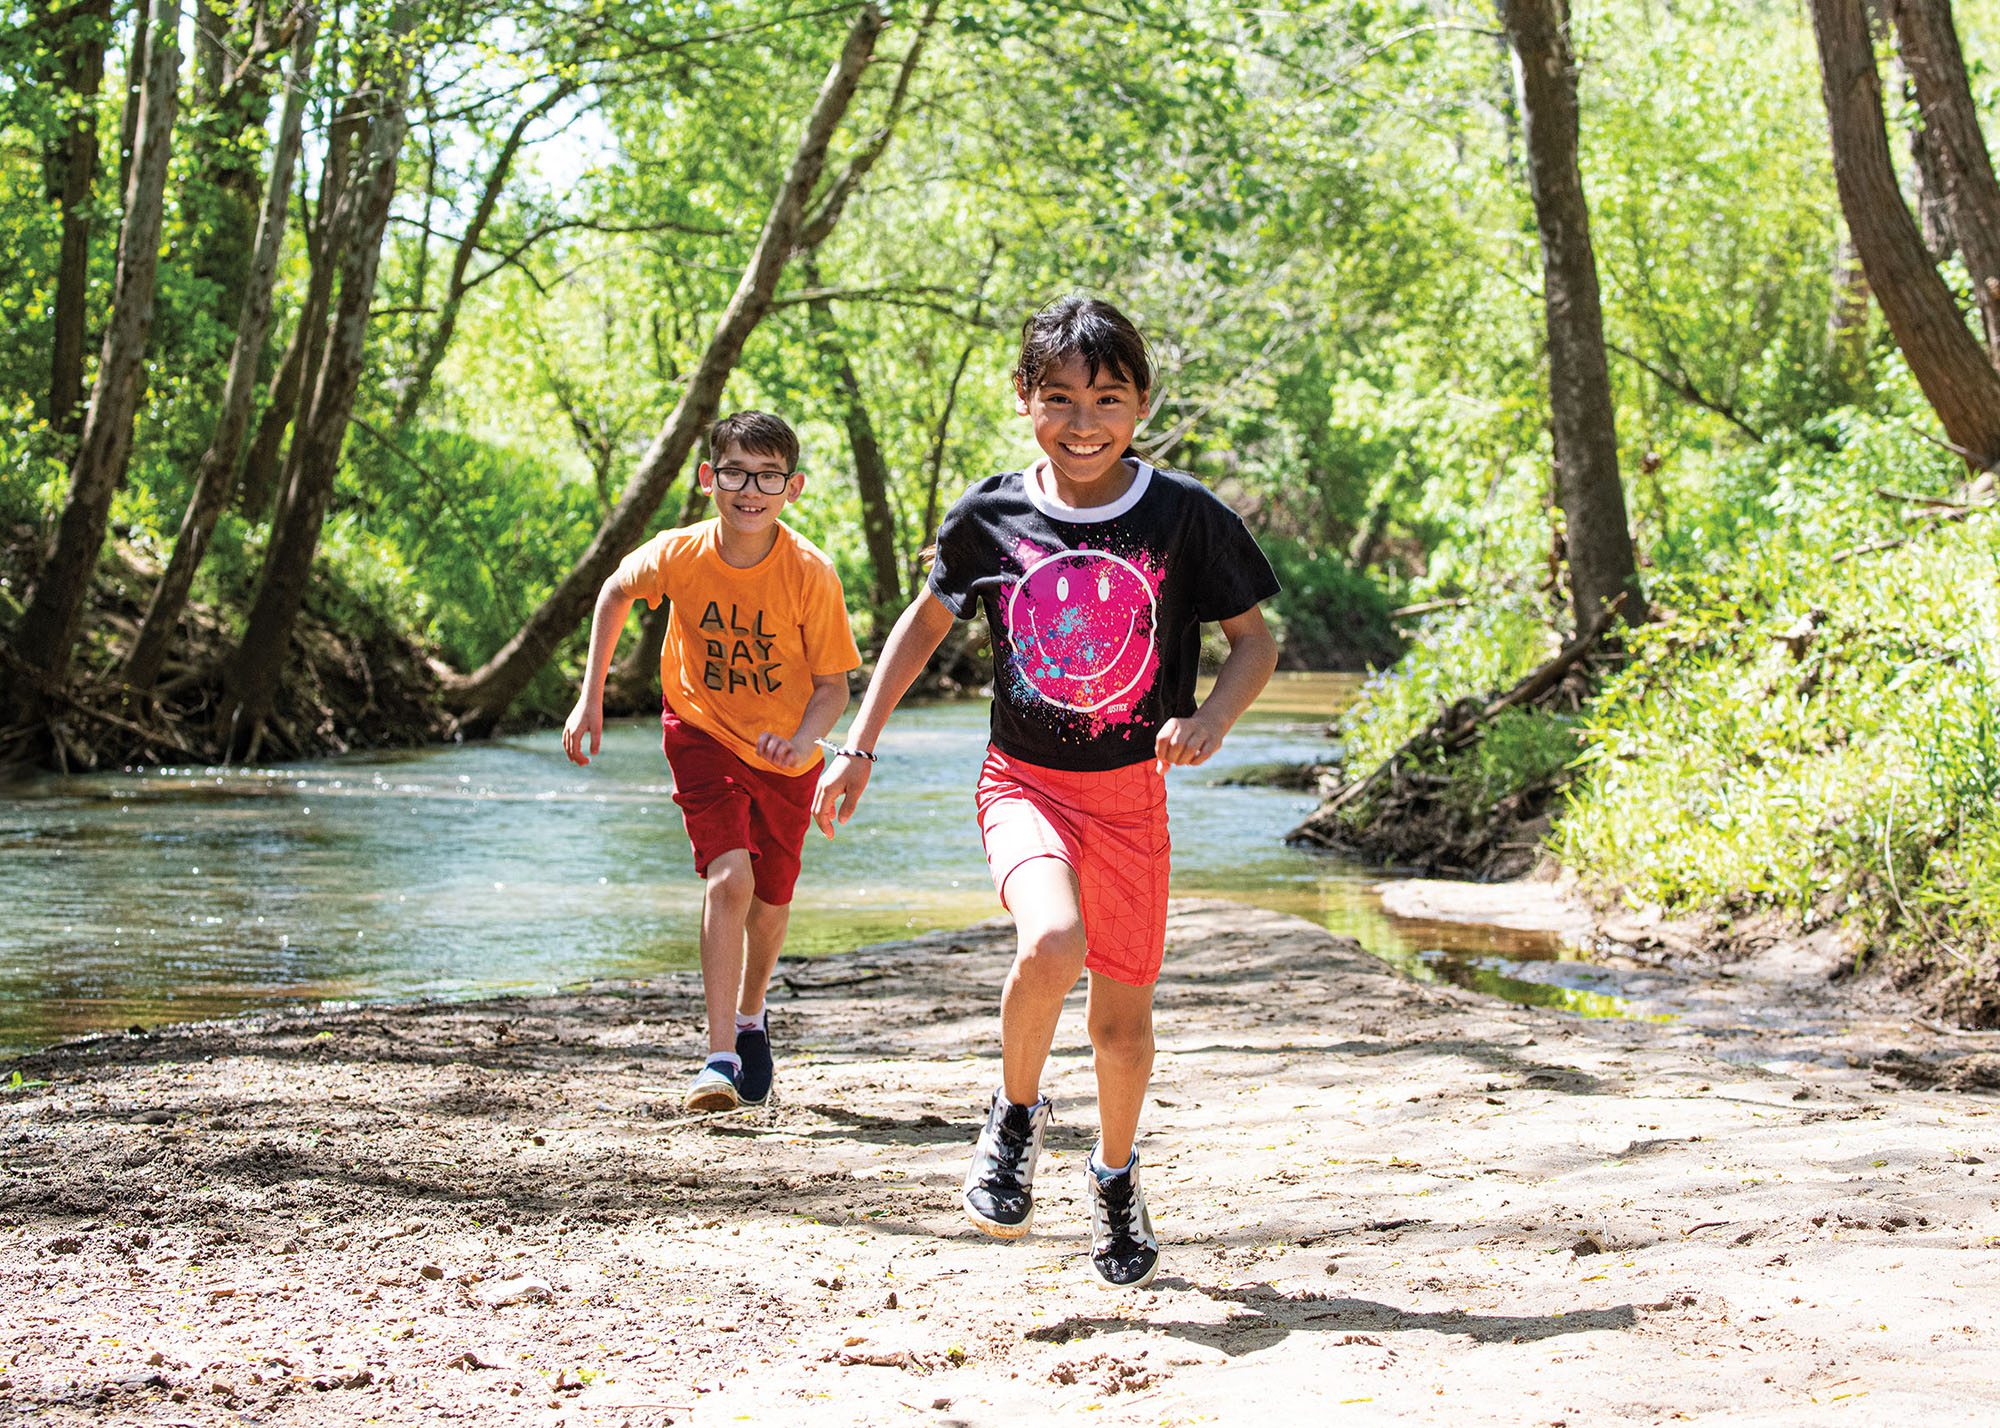 Two young people run along a dirt trail near clear water and green trees